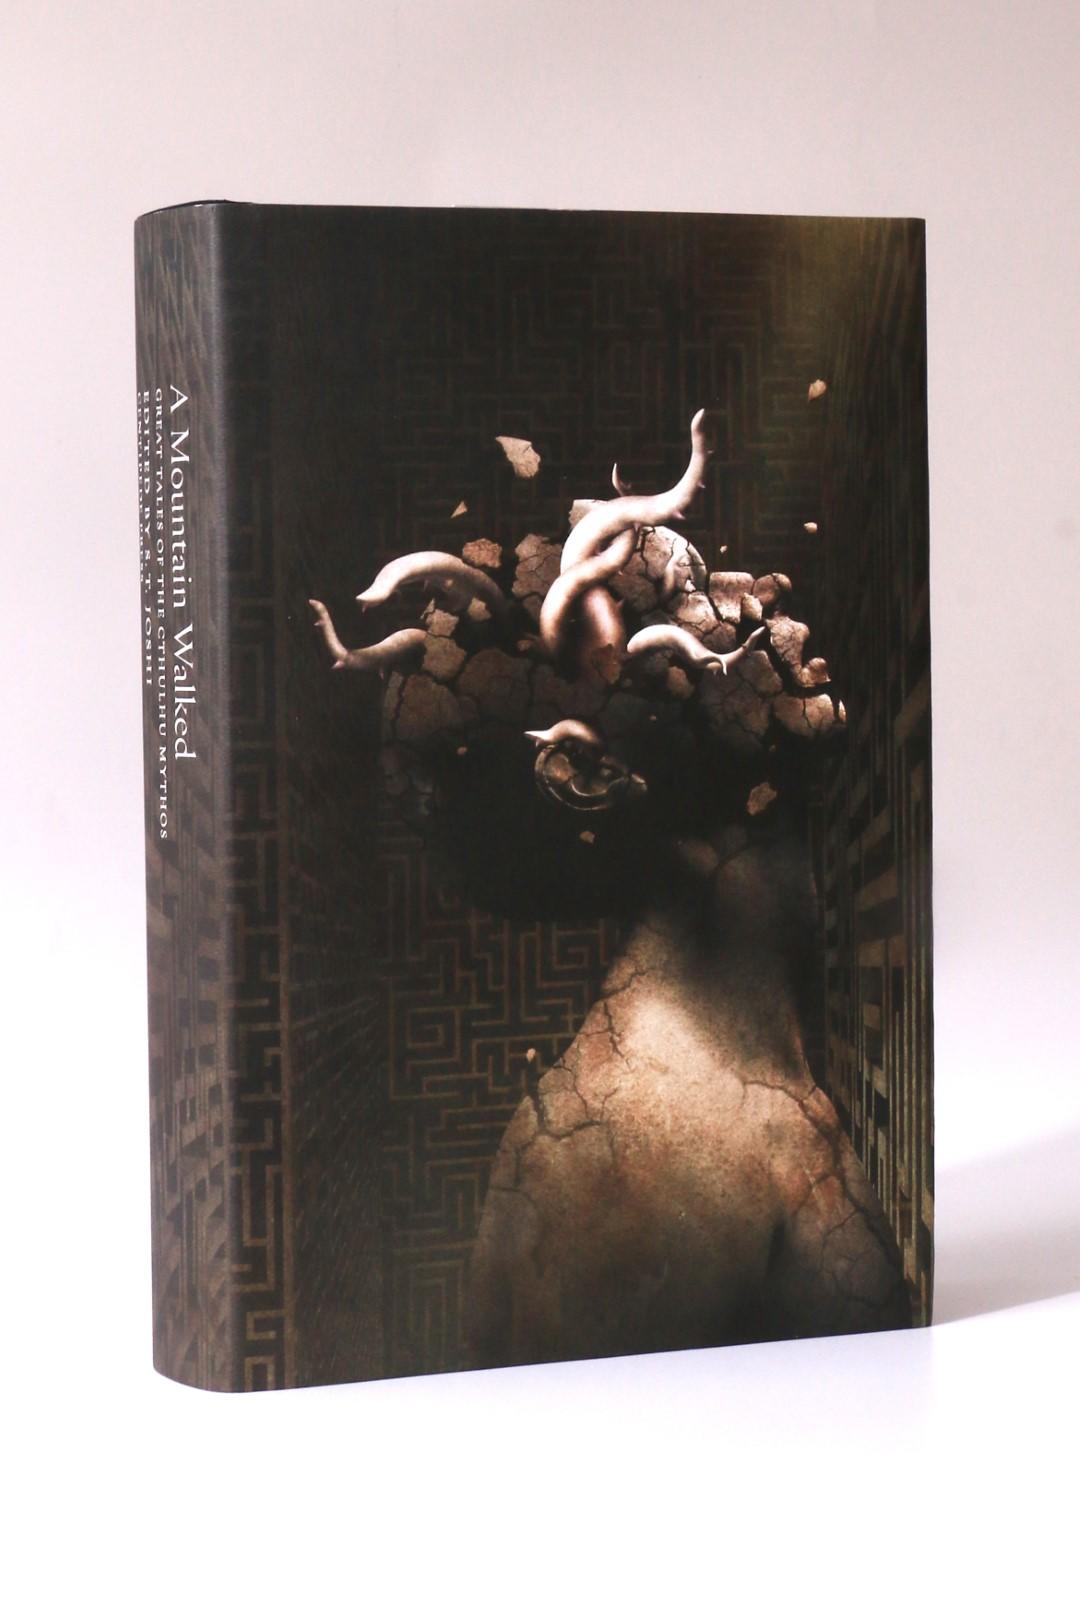 S.T. Joshi - A Mountain Walked - Centipede Press, 2014, Limited Edition.